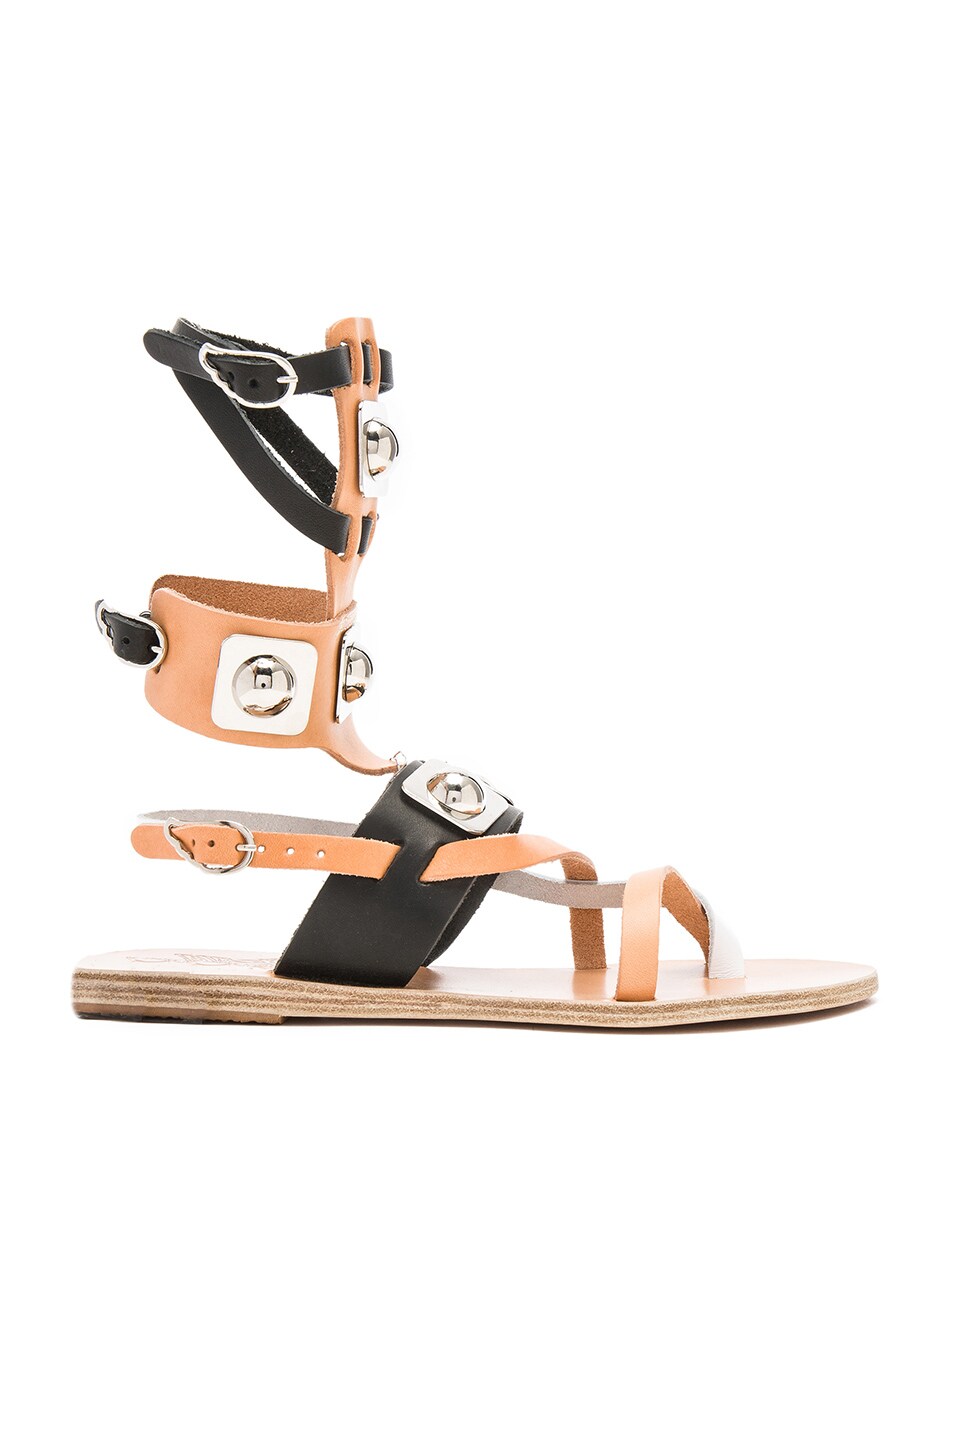 Image 1 of Ancient Greek Sandals x Peter Pilotto Leather Low Gladiator Sandals in Black, Natural & White